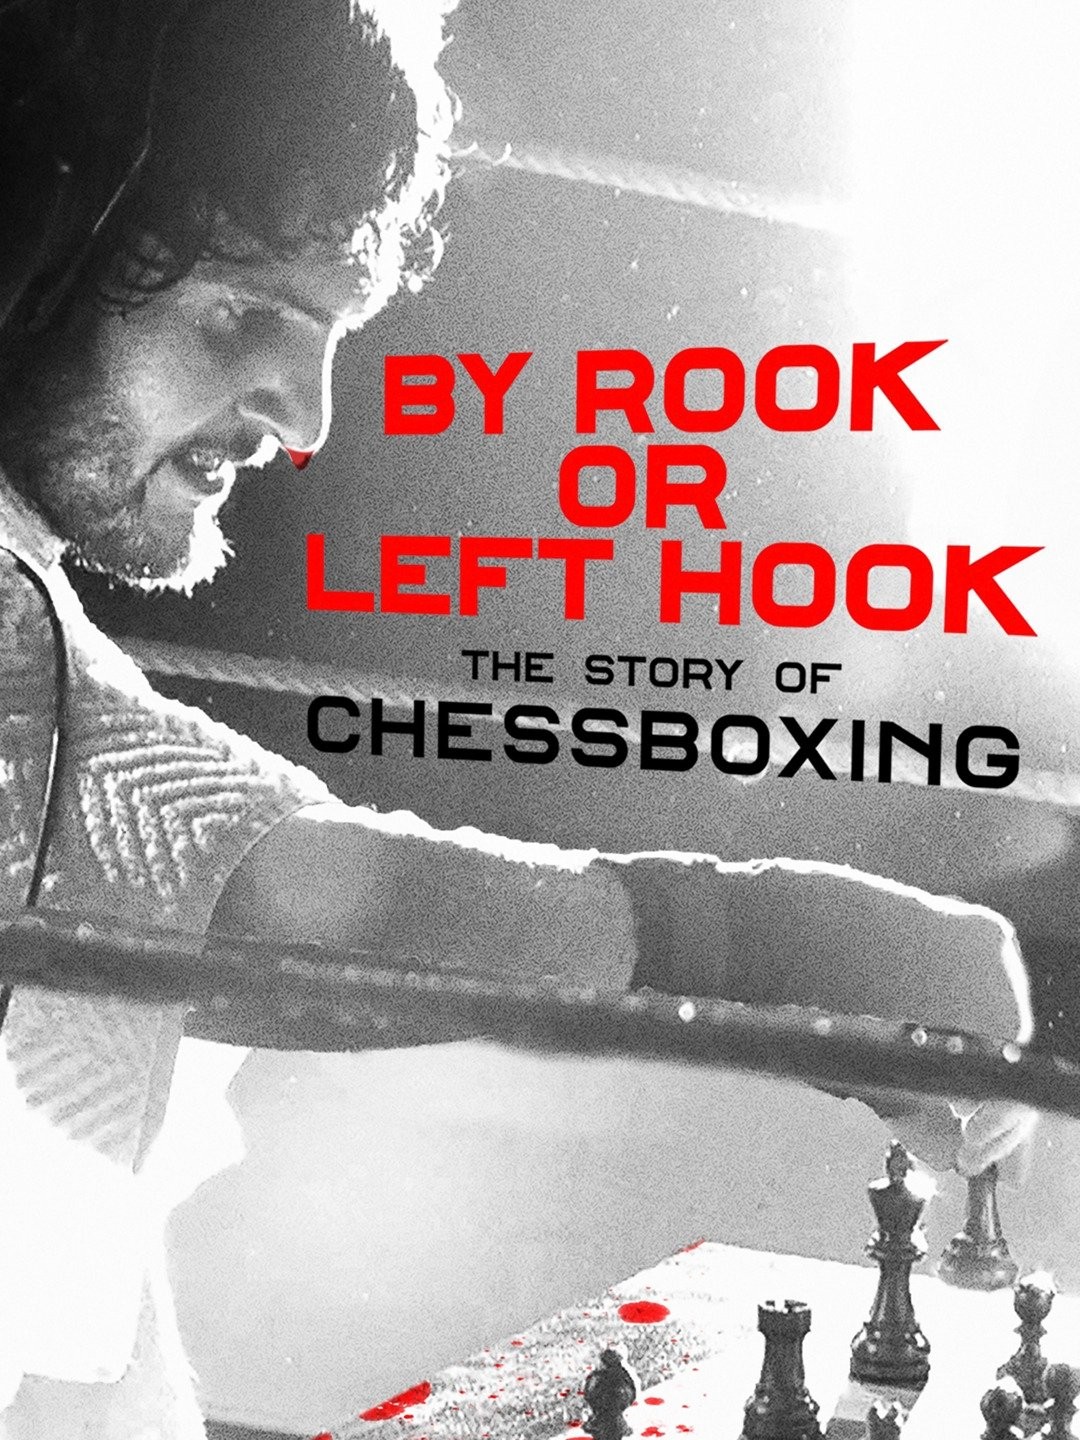 By Rook or Left Hook The Story of Chessboxing - Documentary Review  Melbourne Documentary Festival 2021